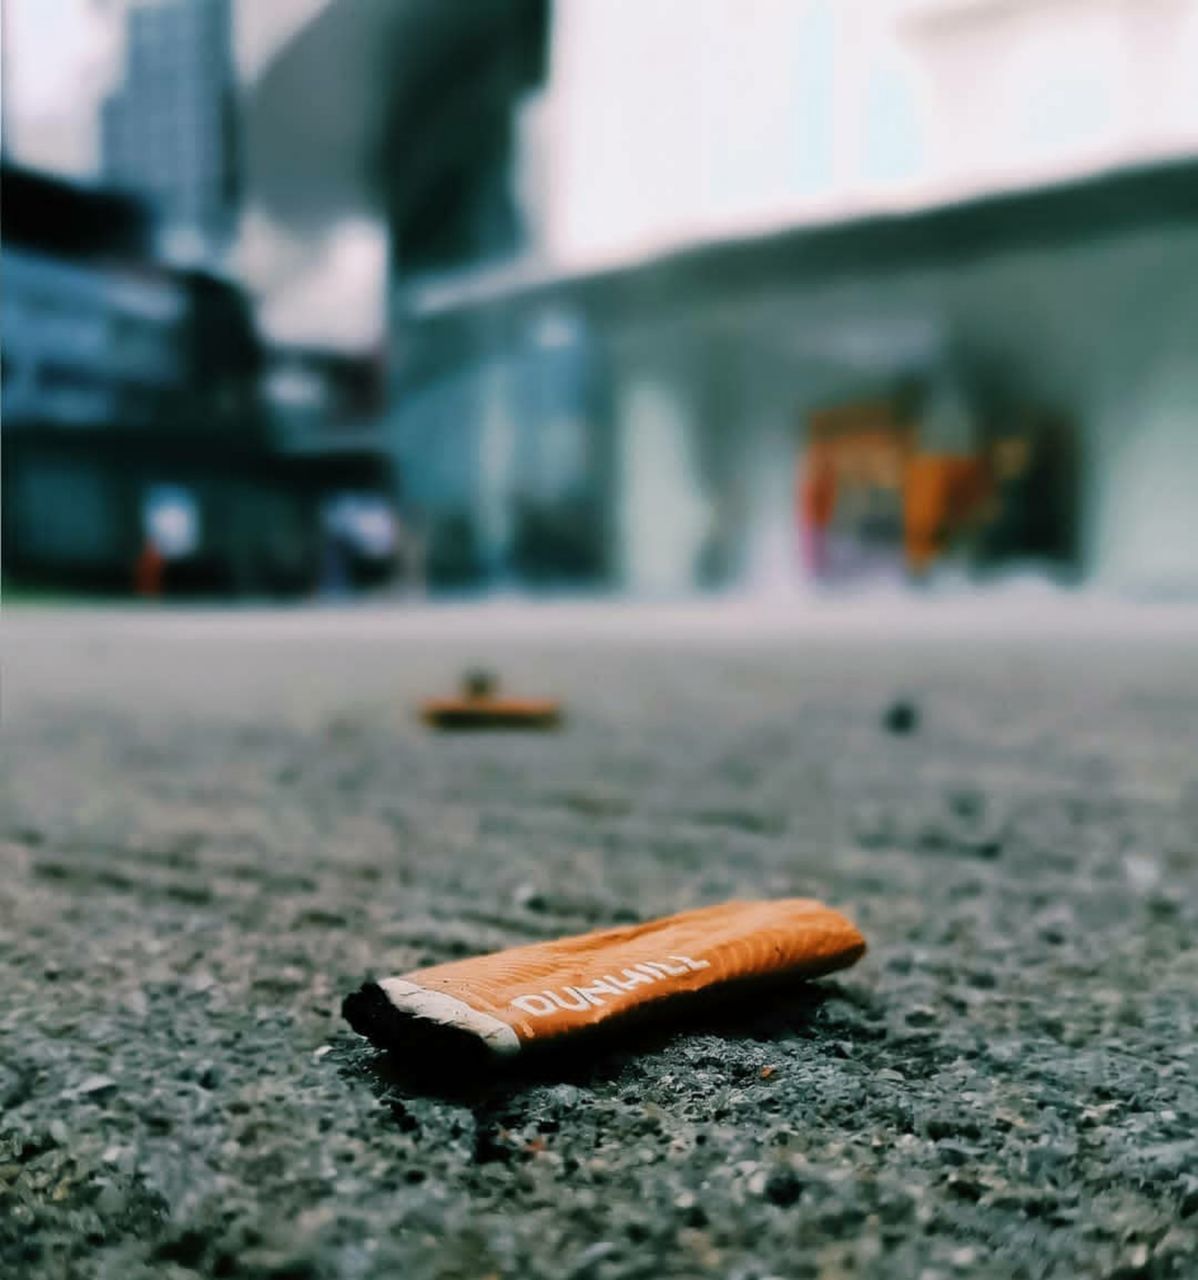 SURFACE LEVEL OF CIGARETTE ON STREET IN CITY